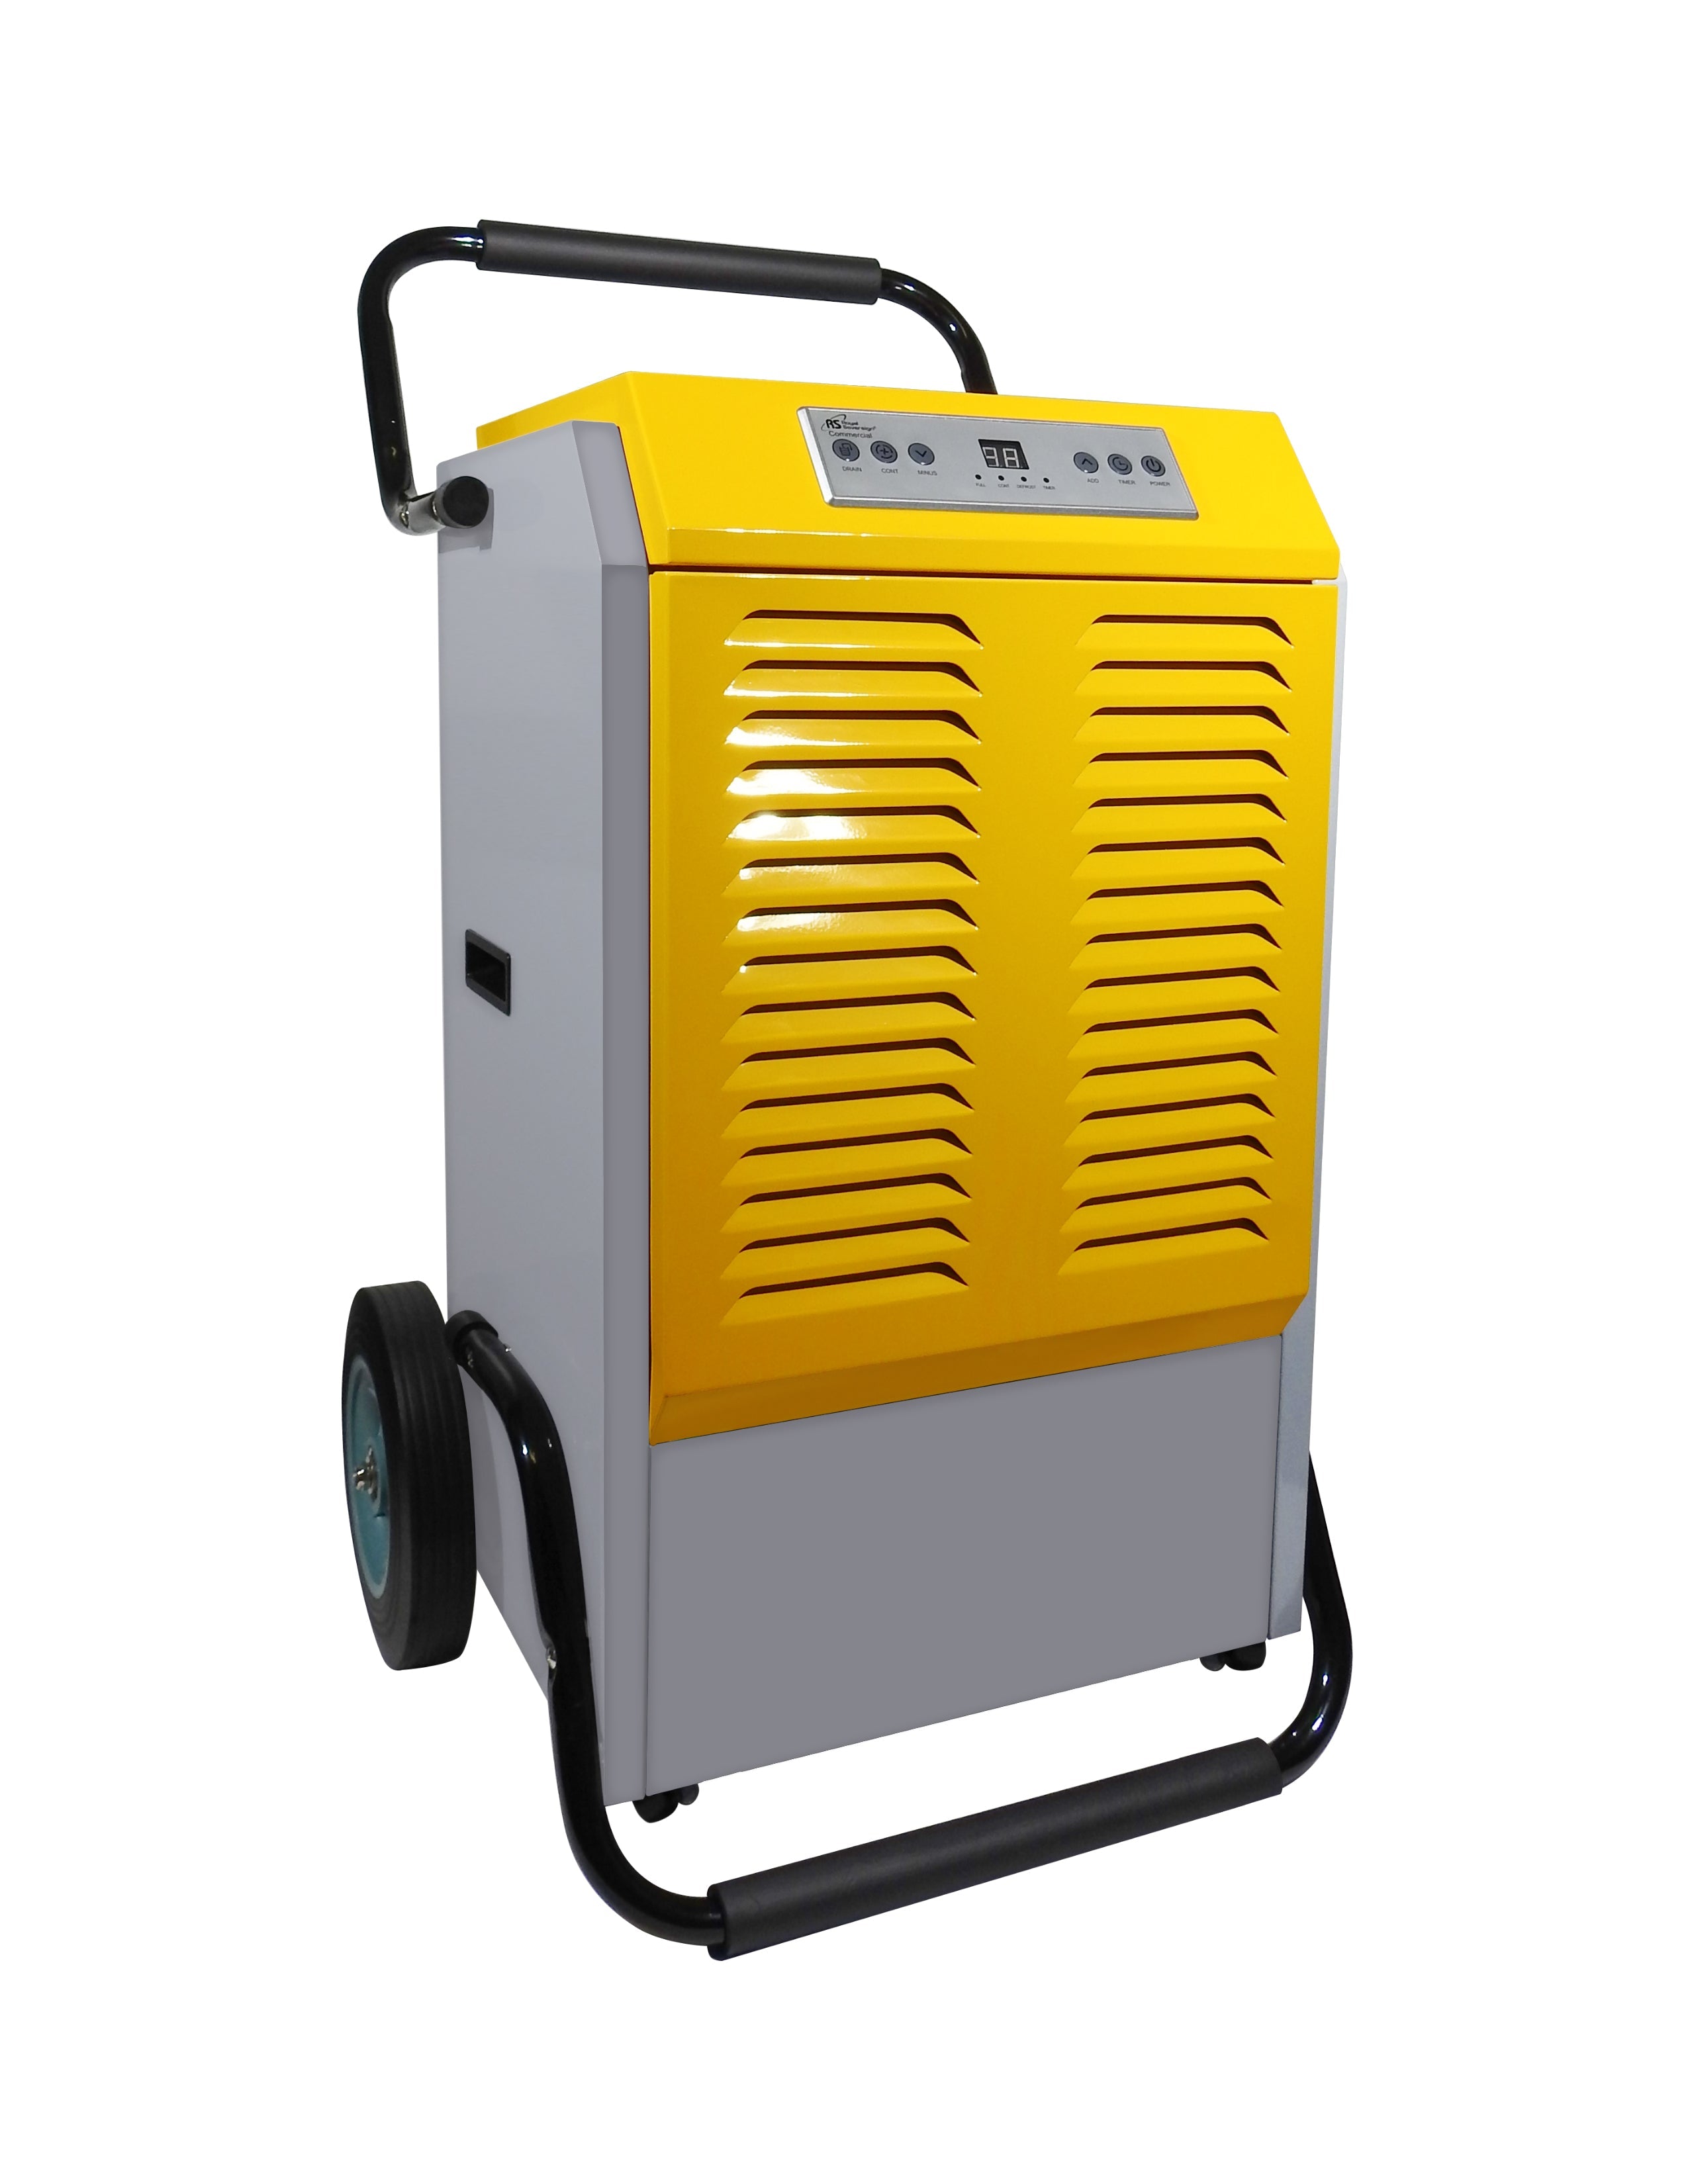 RDHC-190P/ 232 Pint Commercial Dehumidifier with Auto Purge Pump